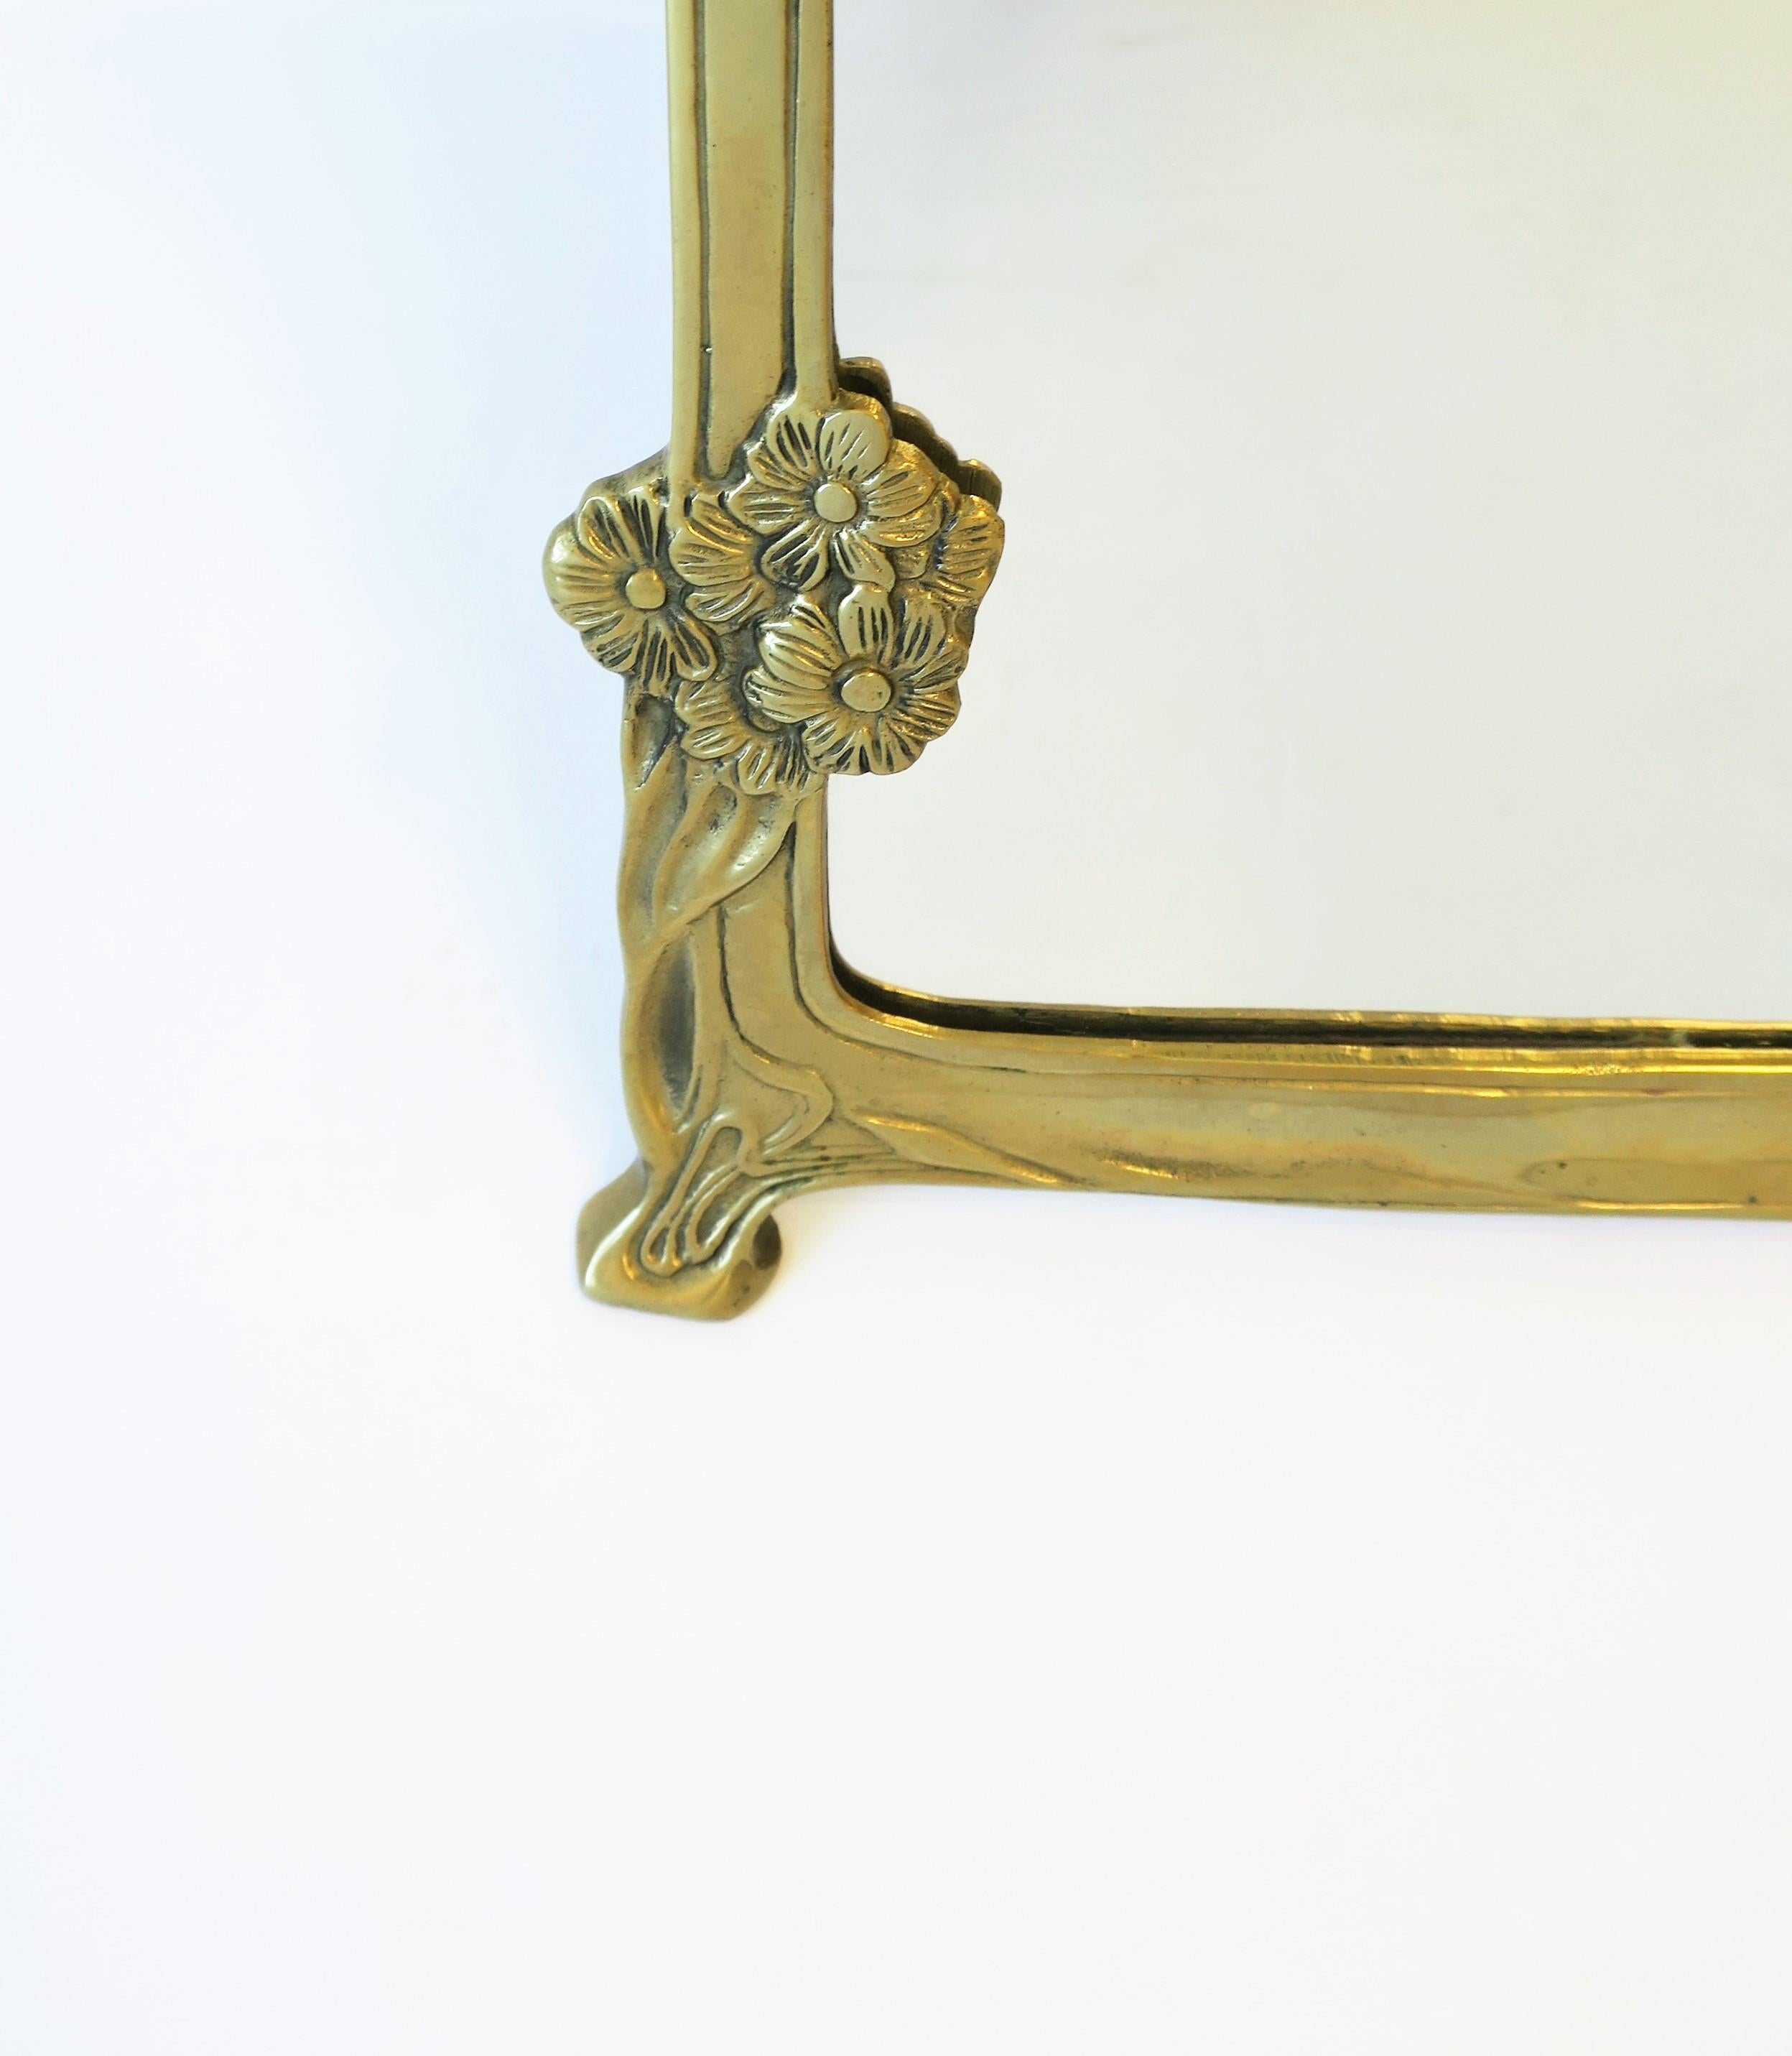 20th Century Brass Vanity Mirror in the Art Nouveau Style